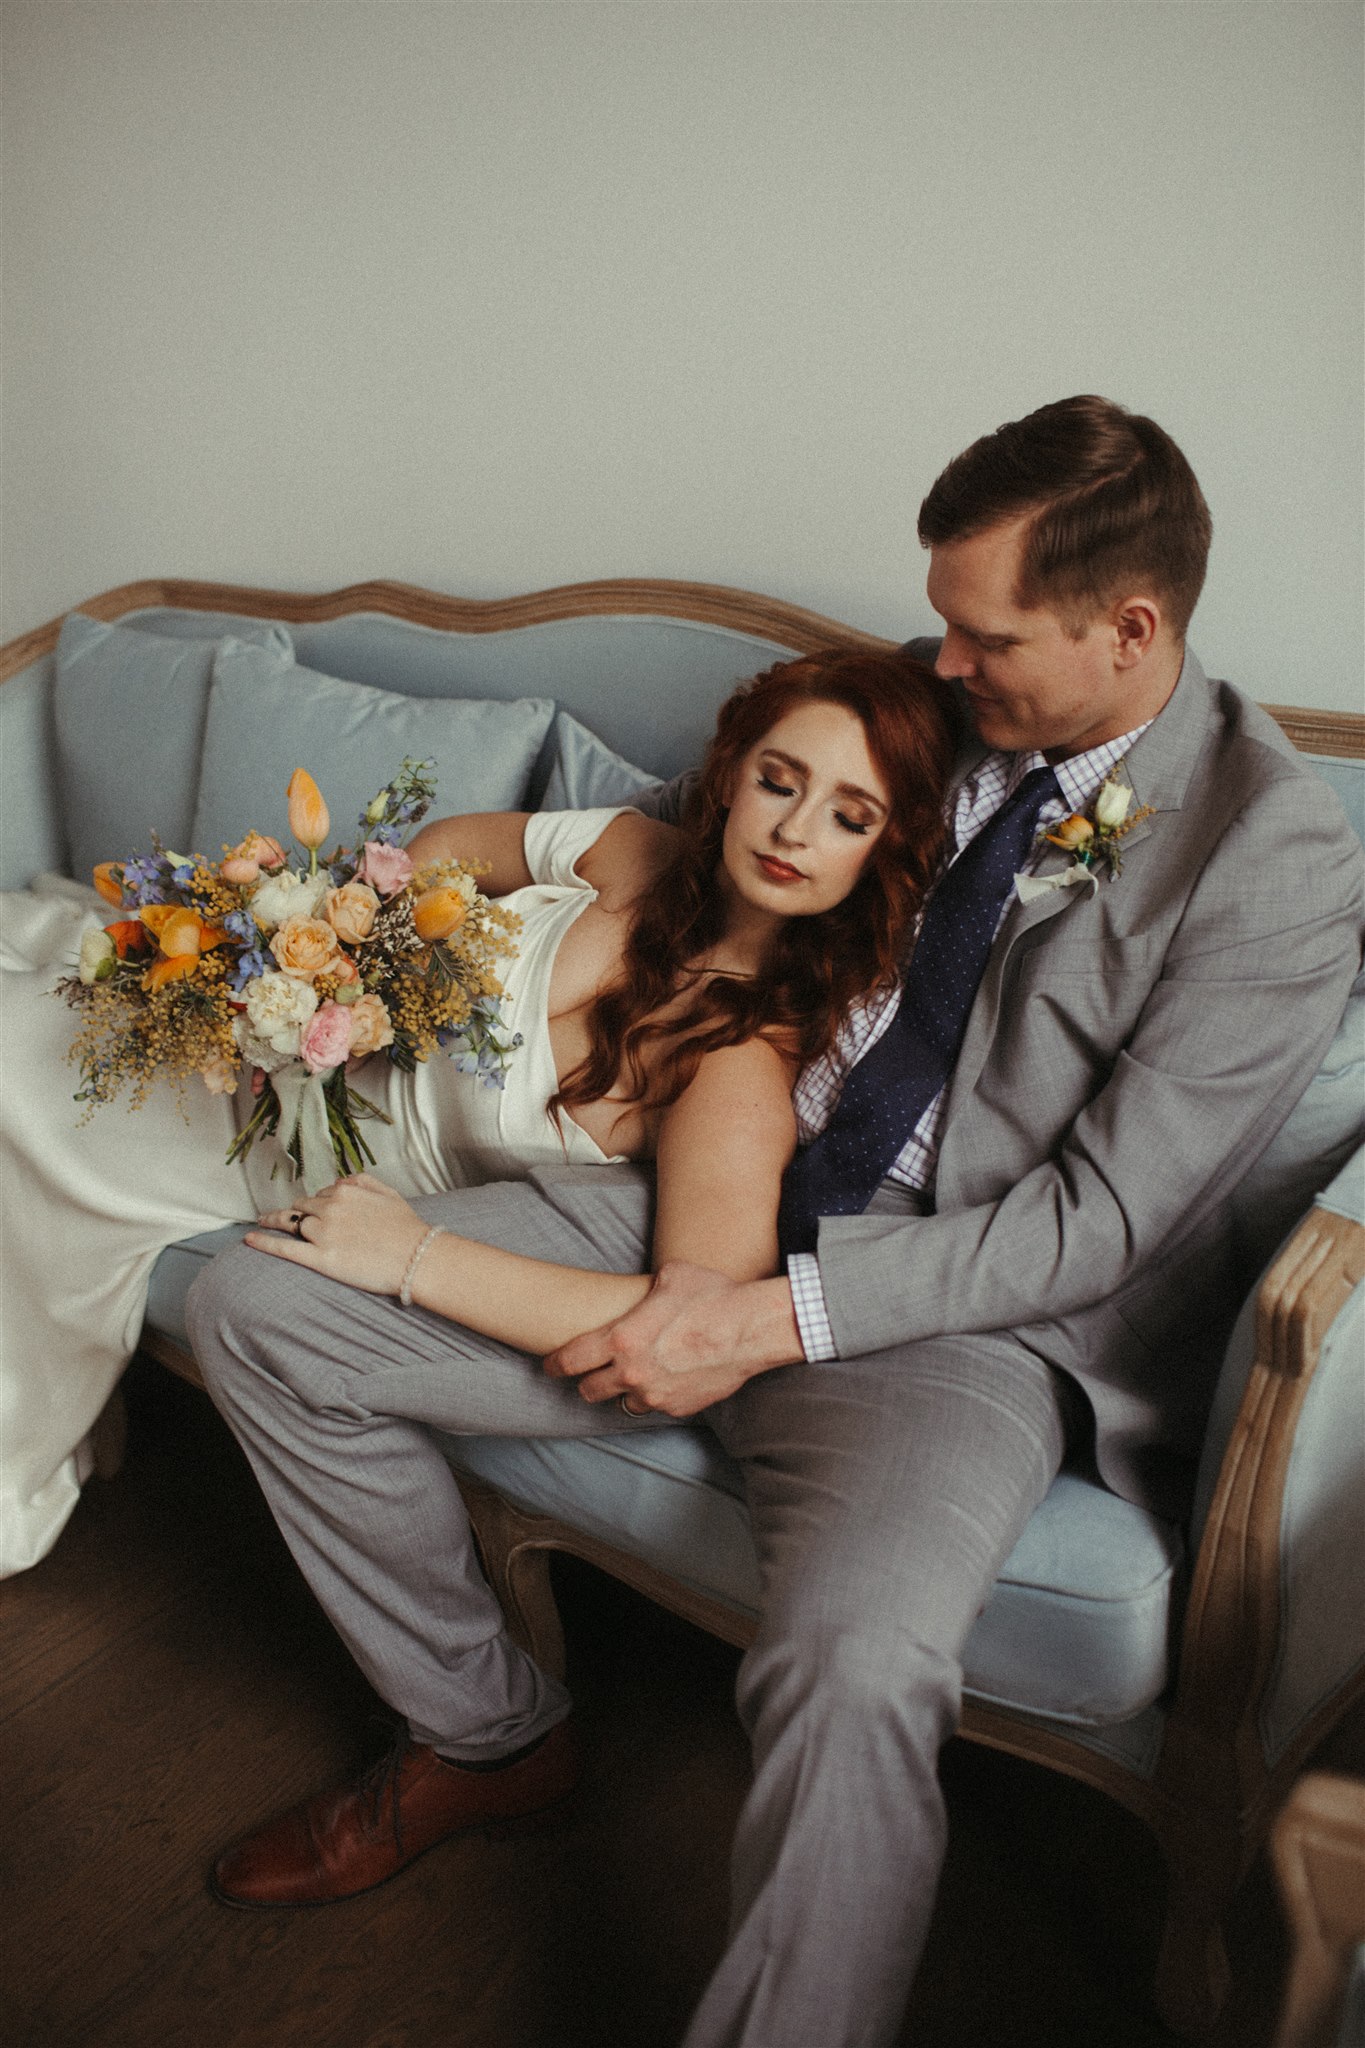 Couple on Couch with Bouquet